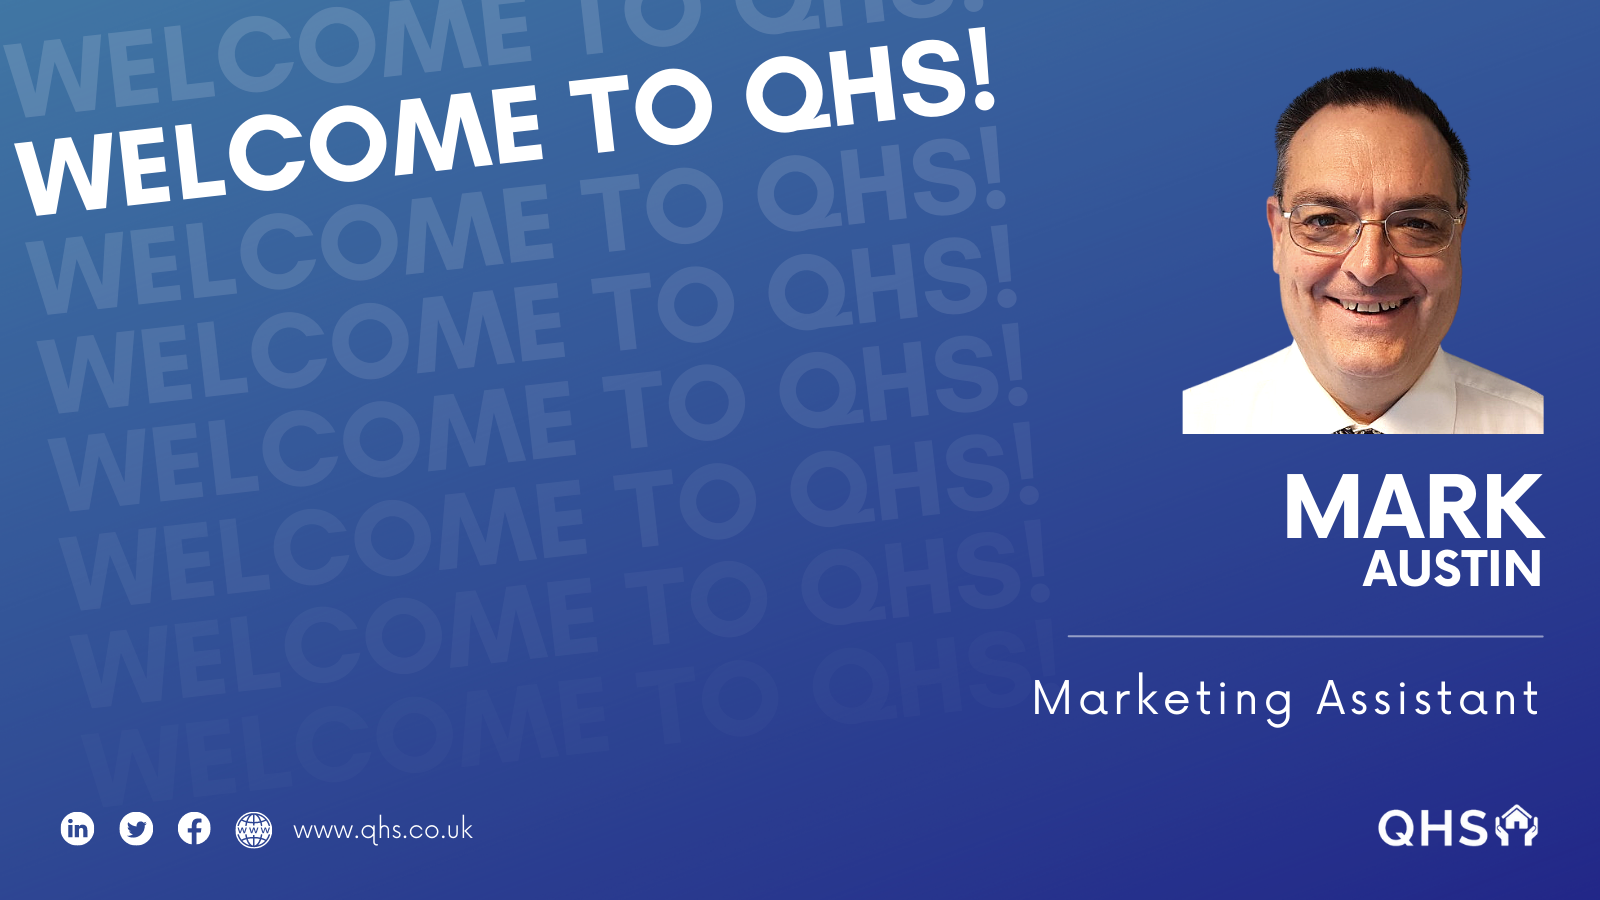 Welcome Mark Austin to QHS